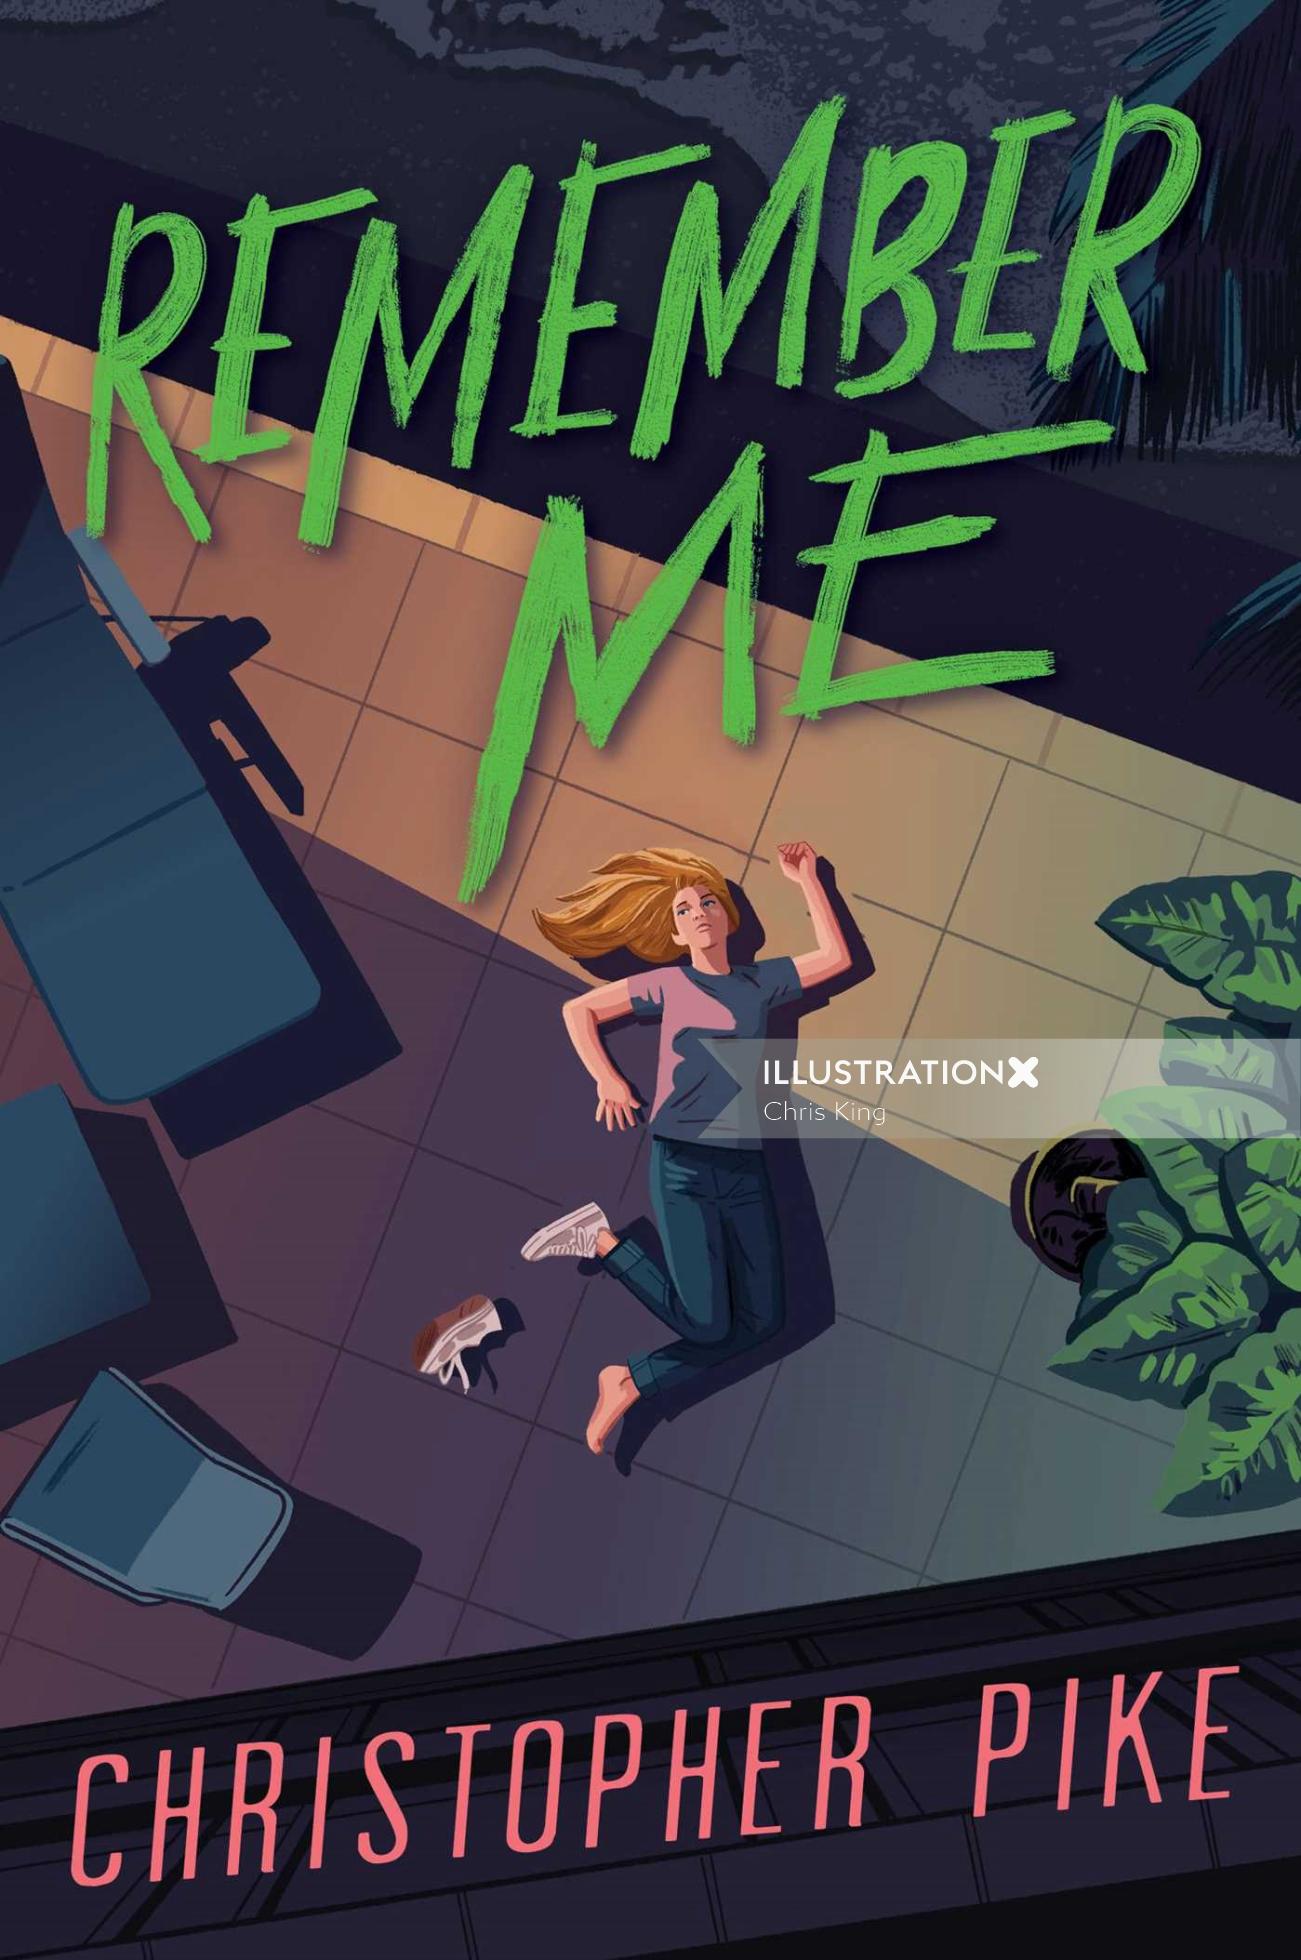 Cover illustration of Remember Me book